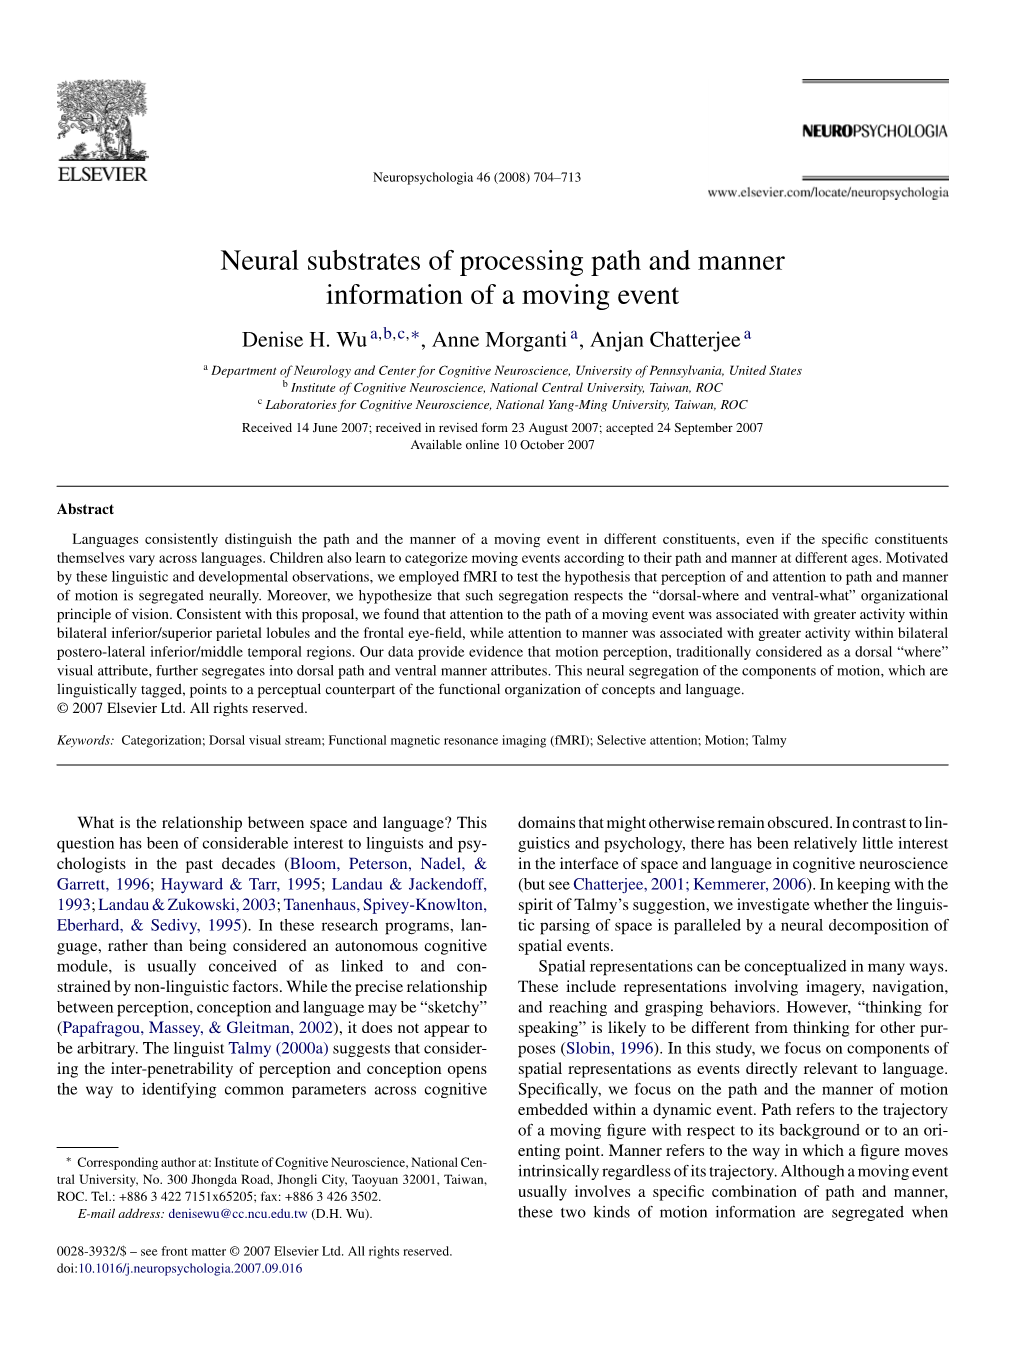 Neural Substrates of Processing Path and Manner Information of a Moving Event Denise H